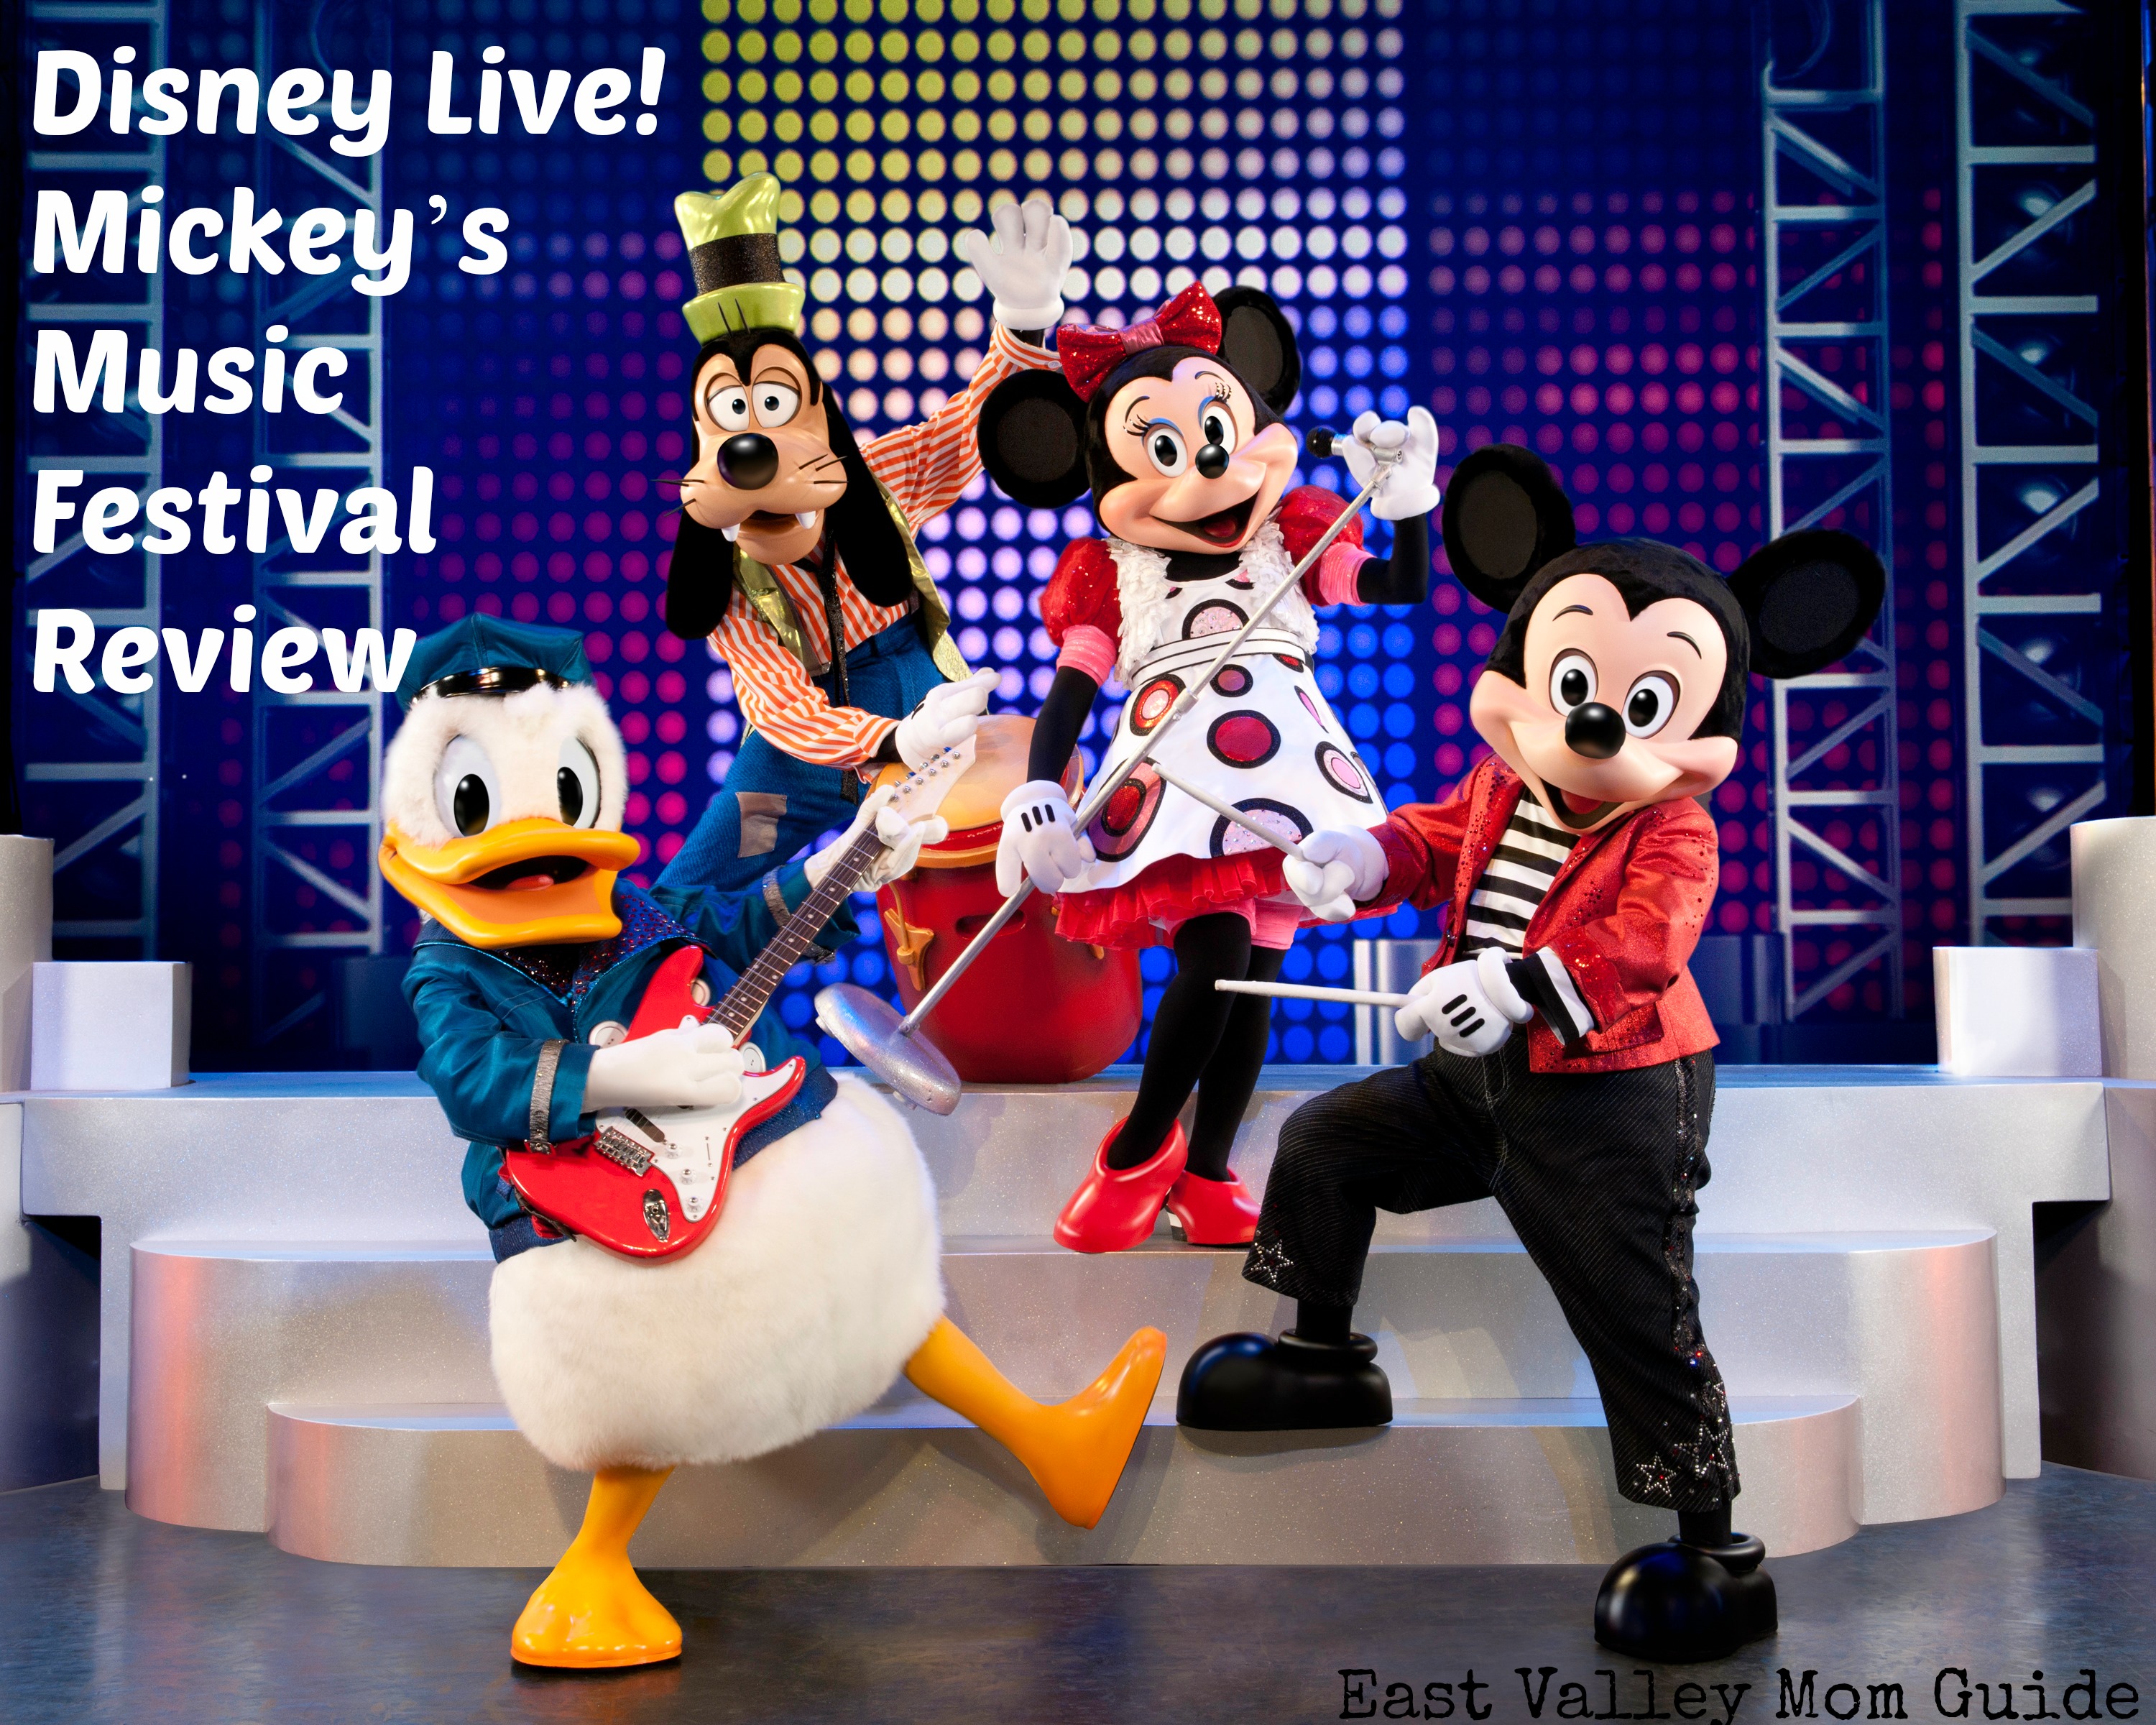 Disney Live! Mickey’s Music Festival Review East Valley Mom Guide